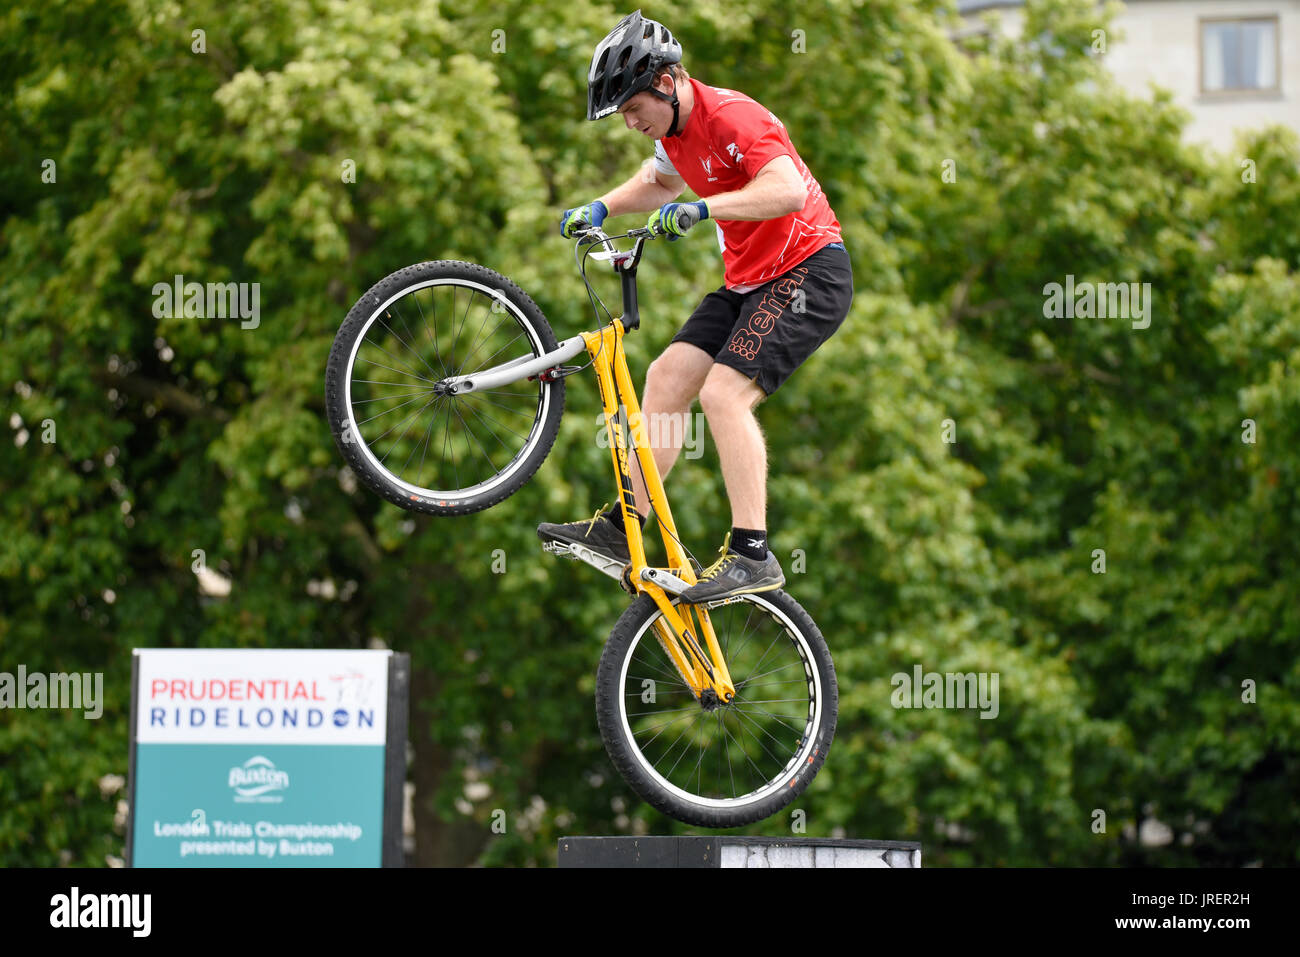 Mountain Bike Stunt High Resolution Stock Photography and Images - Alamy